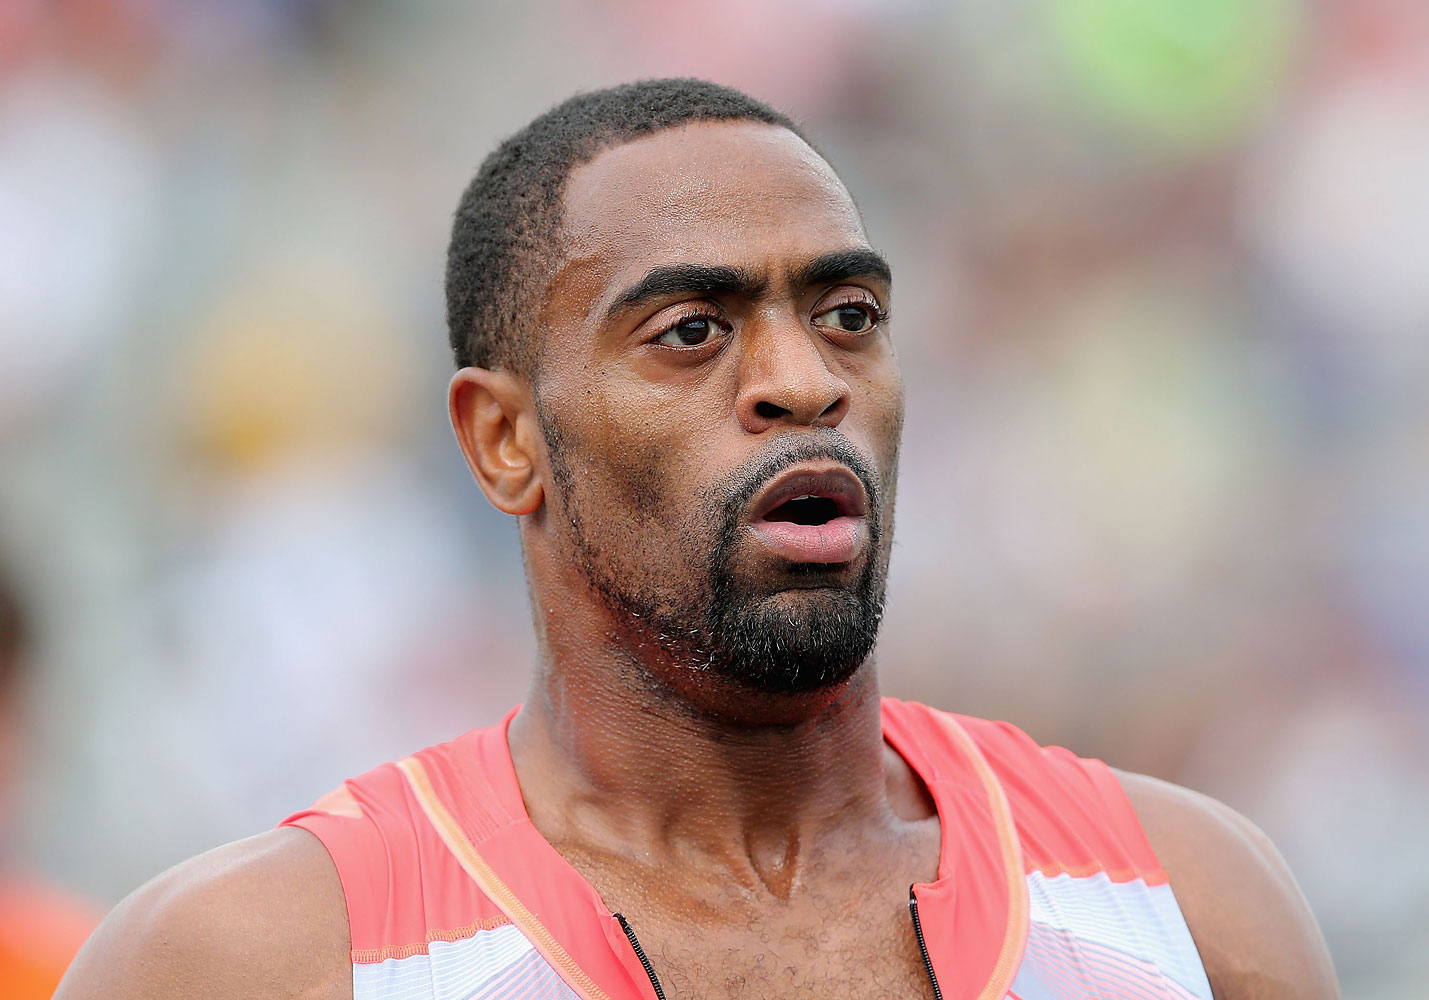 The U.S. Anti-Doping Agency has announced that U.S. sprinter Tyson Gay has received a one-year suspension for testing positive for an anabolic steroid May 2, 2014. (Christian Petersen—Getty Images)